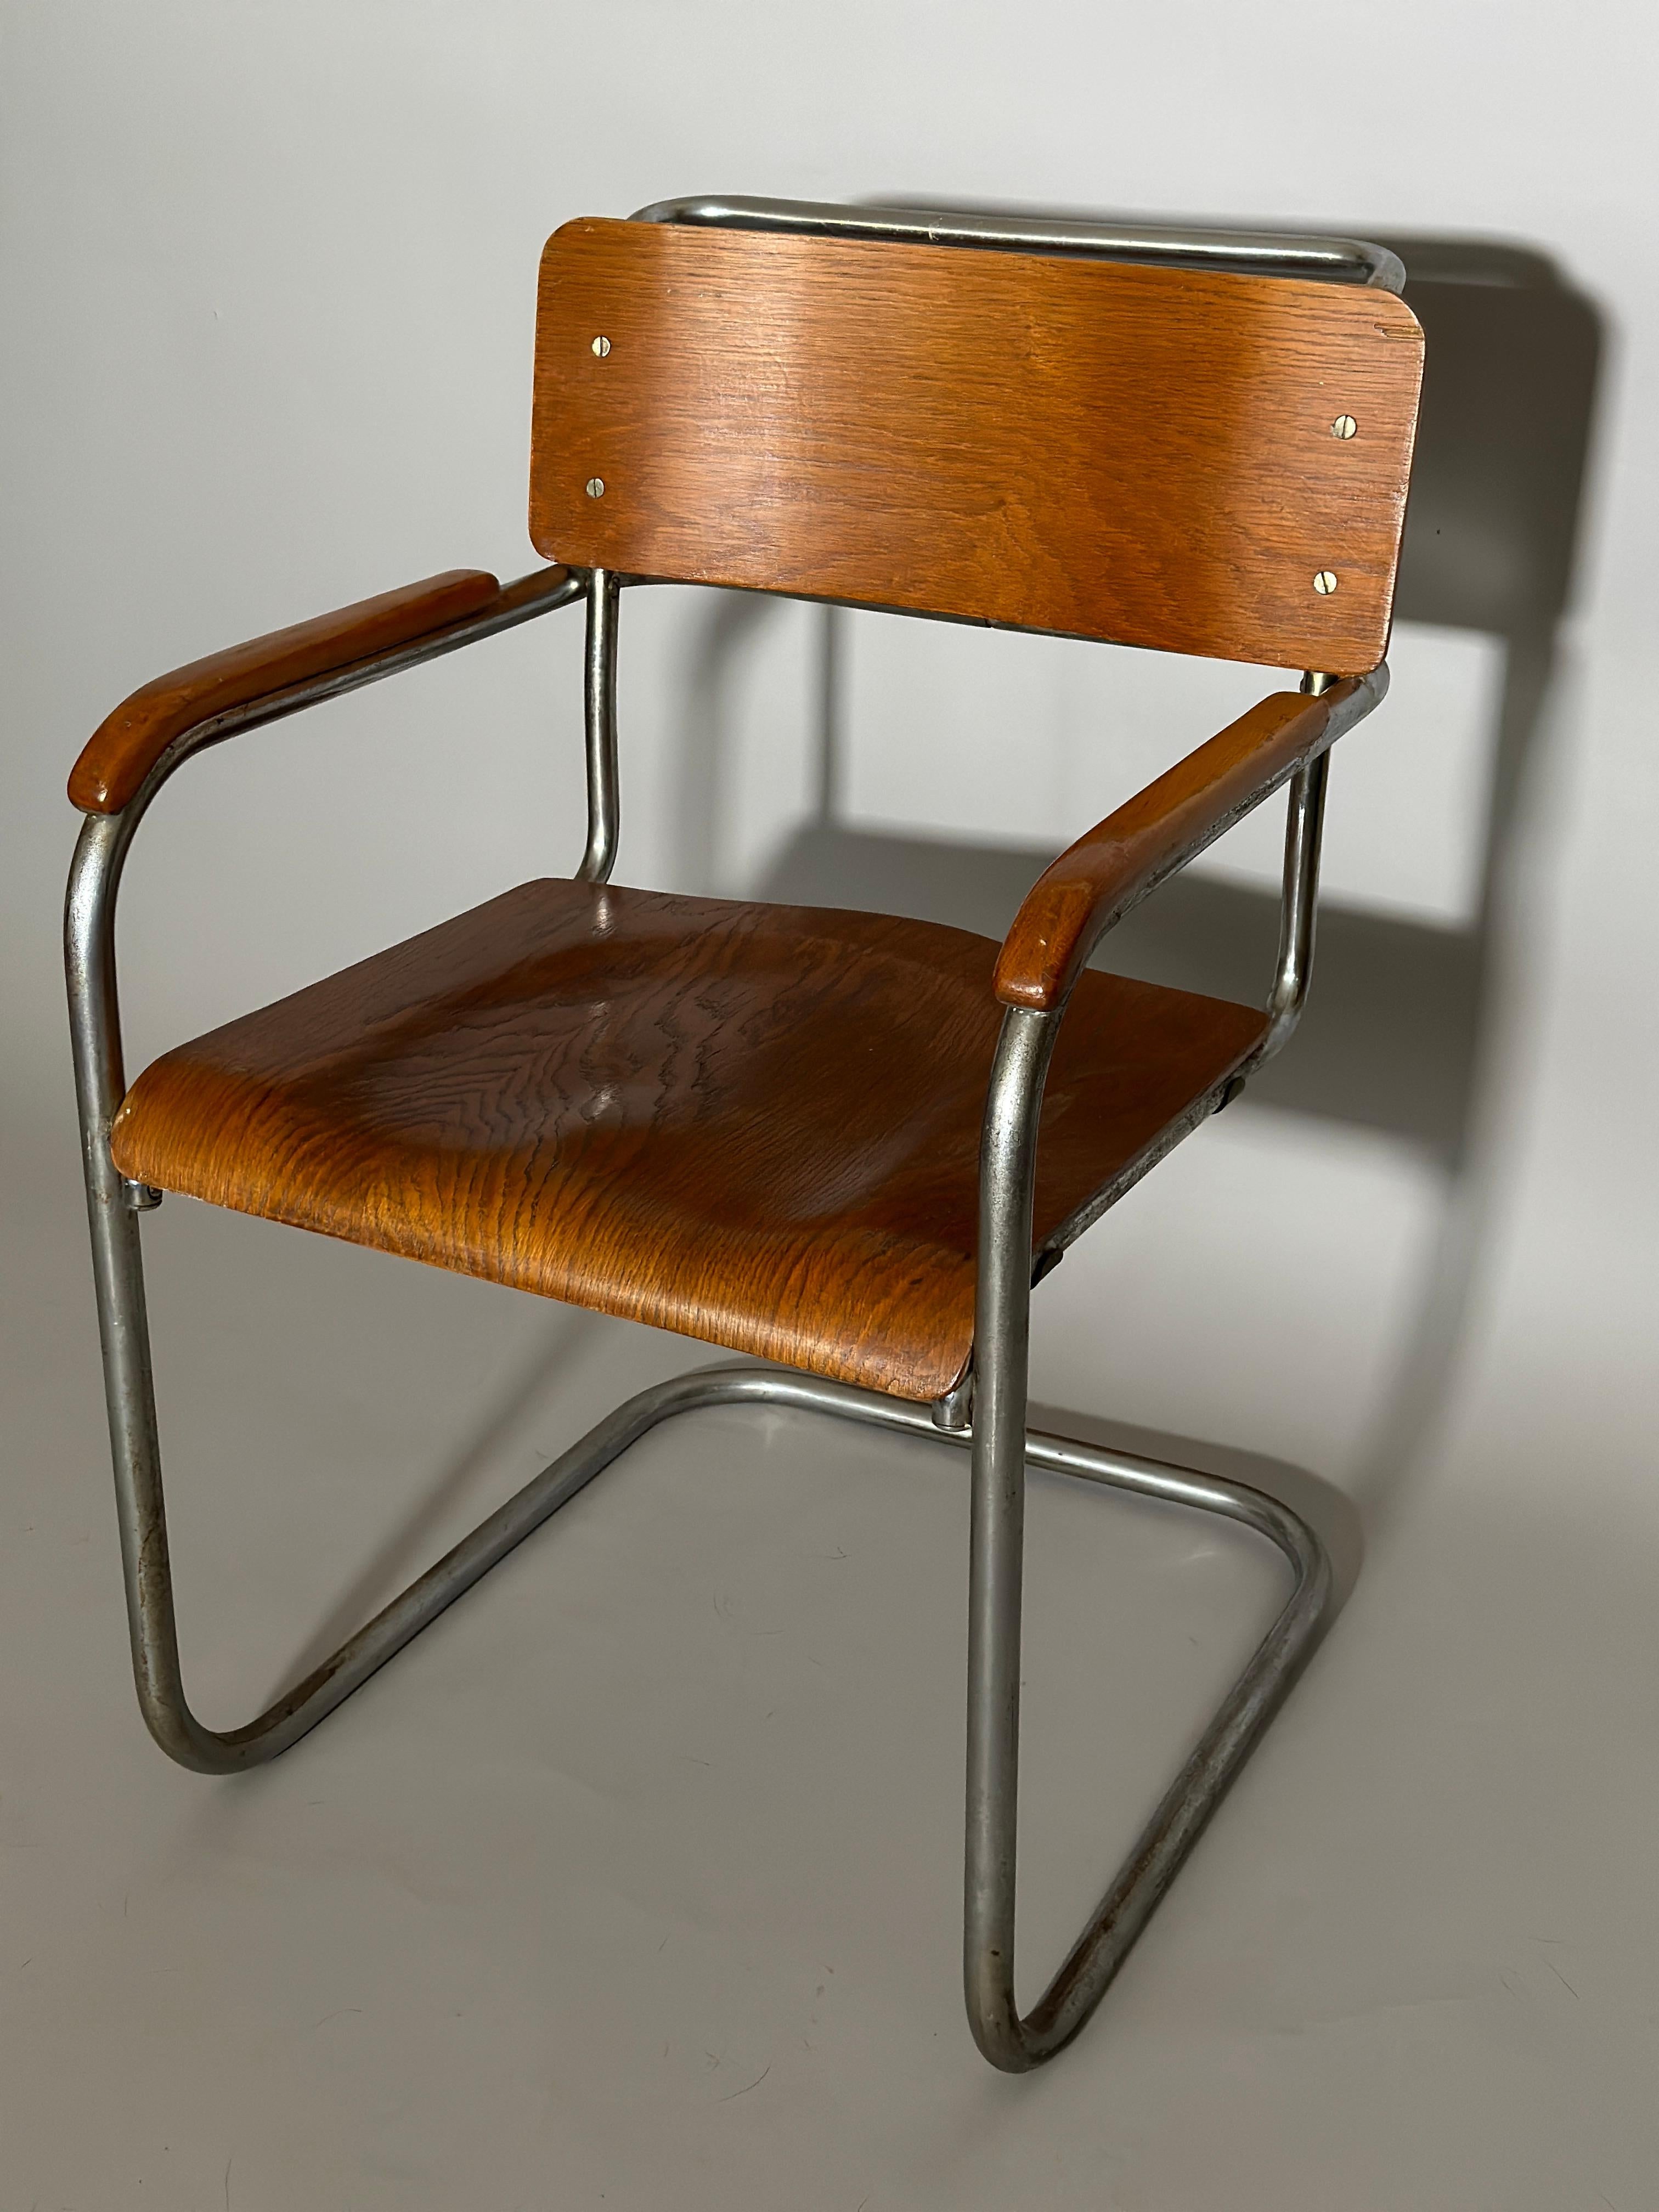 Marcel Breuer B34 chair was made in Czechoslovakia in 1930 for Bata Snofmaner store.